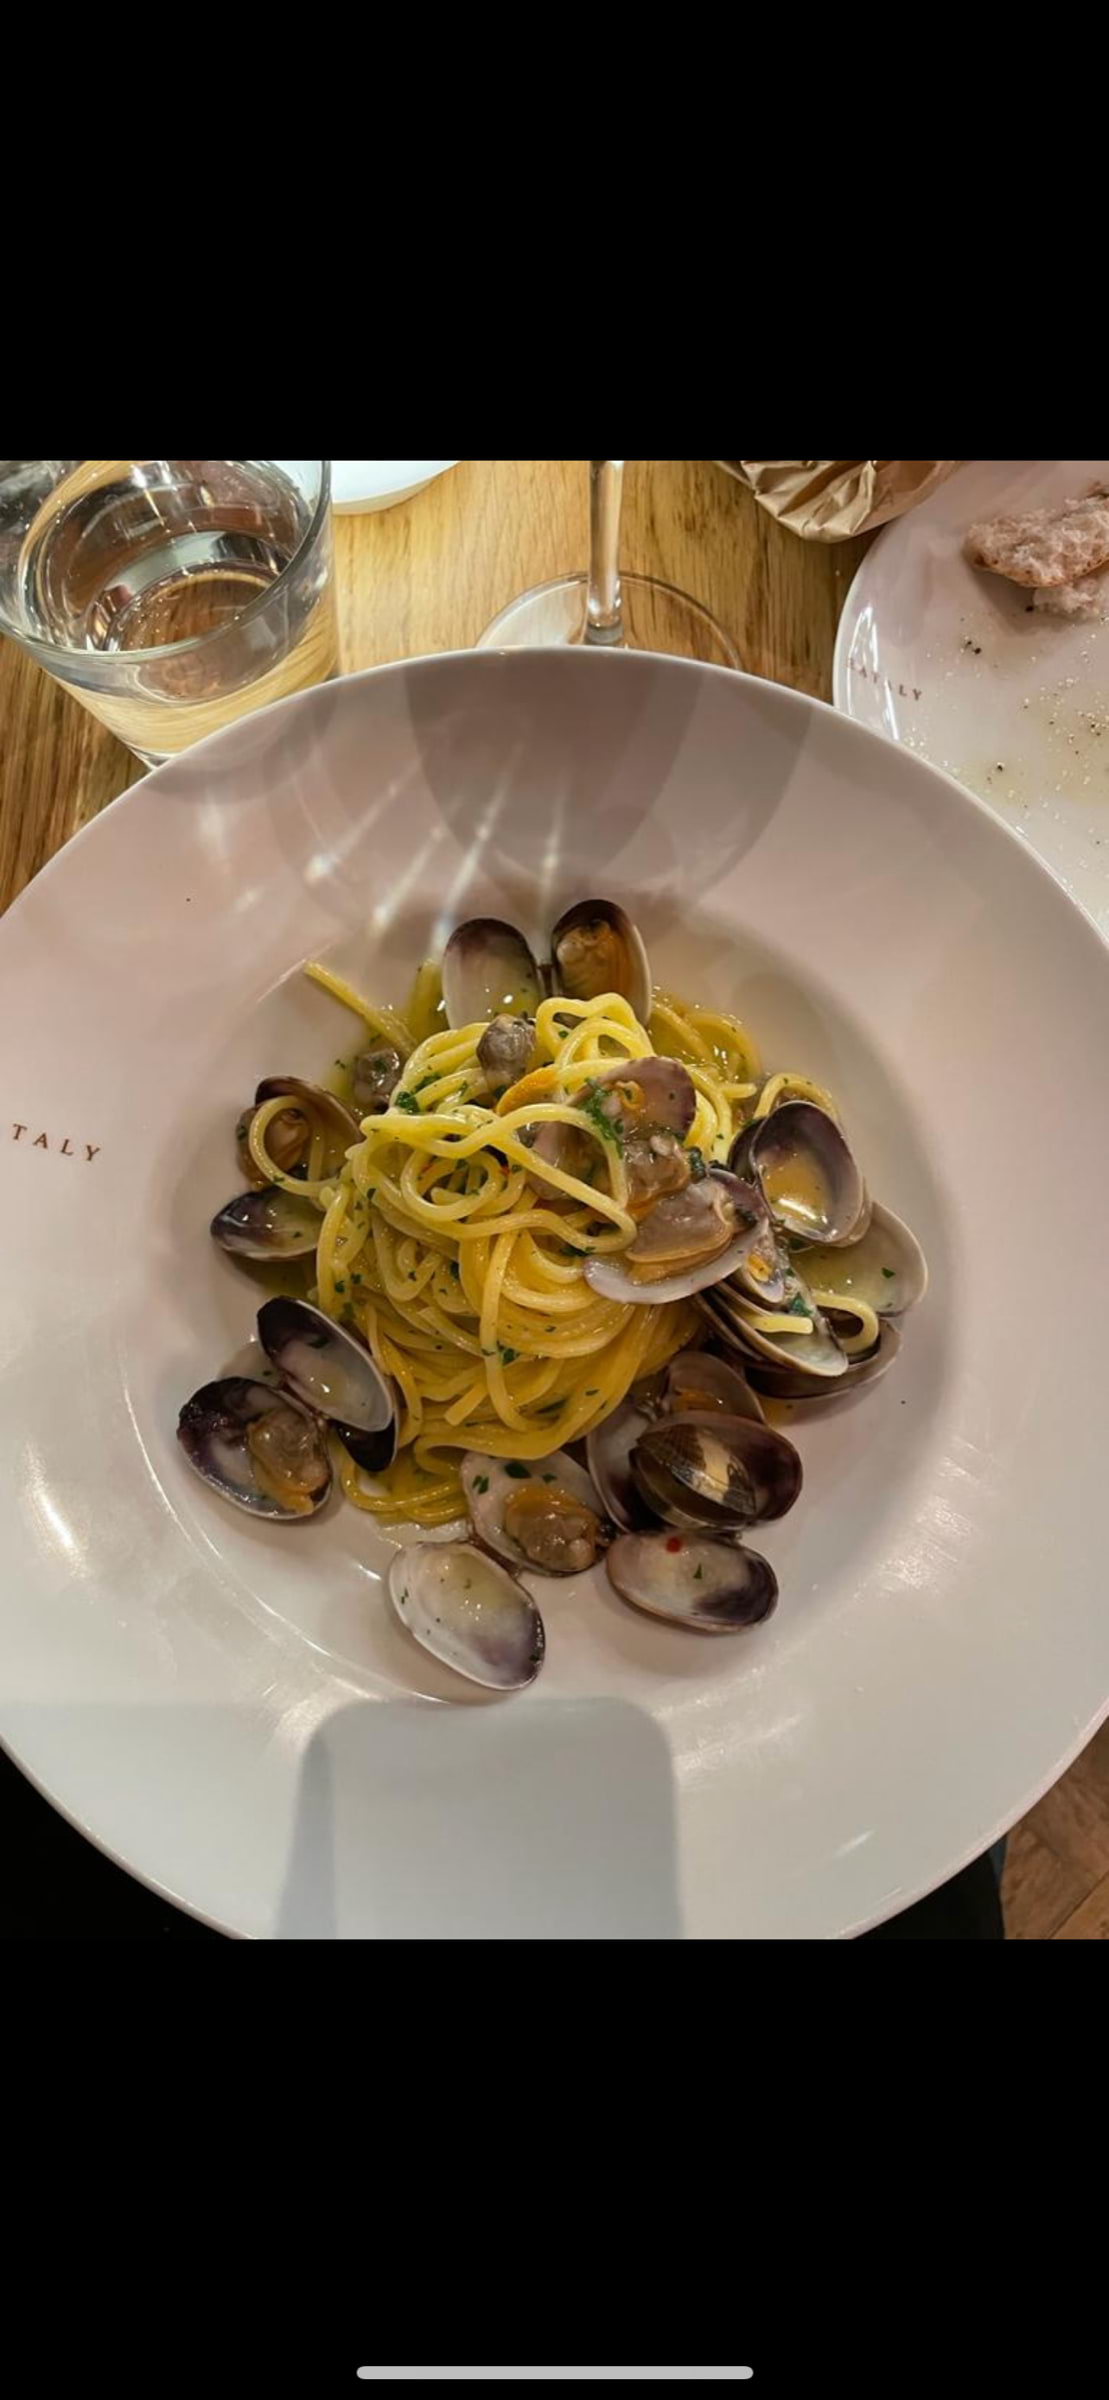 Photo from Eataly by Matilda A. (11/07/2022)